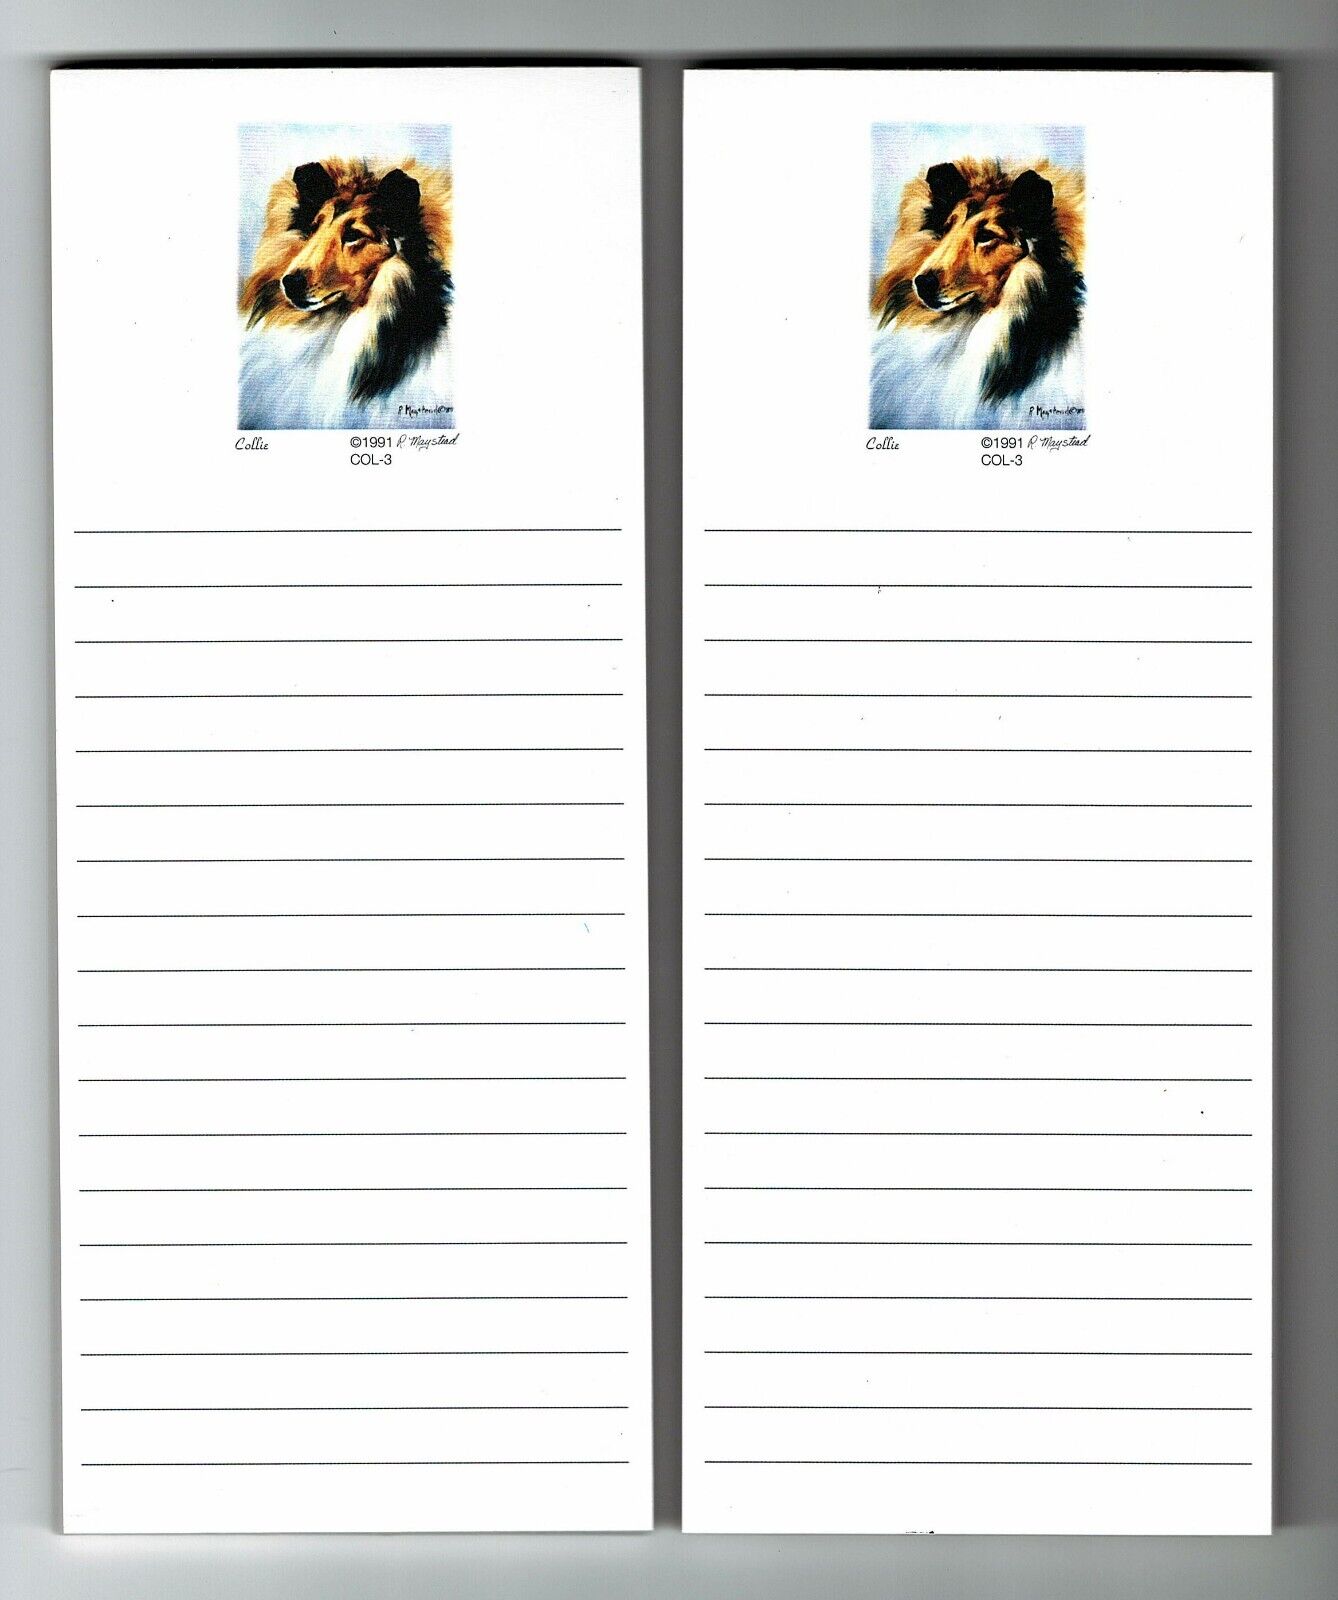 New Rough Collie Magnetic Refrigerator List Pad Set of 2 Pads Ruth Maystead